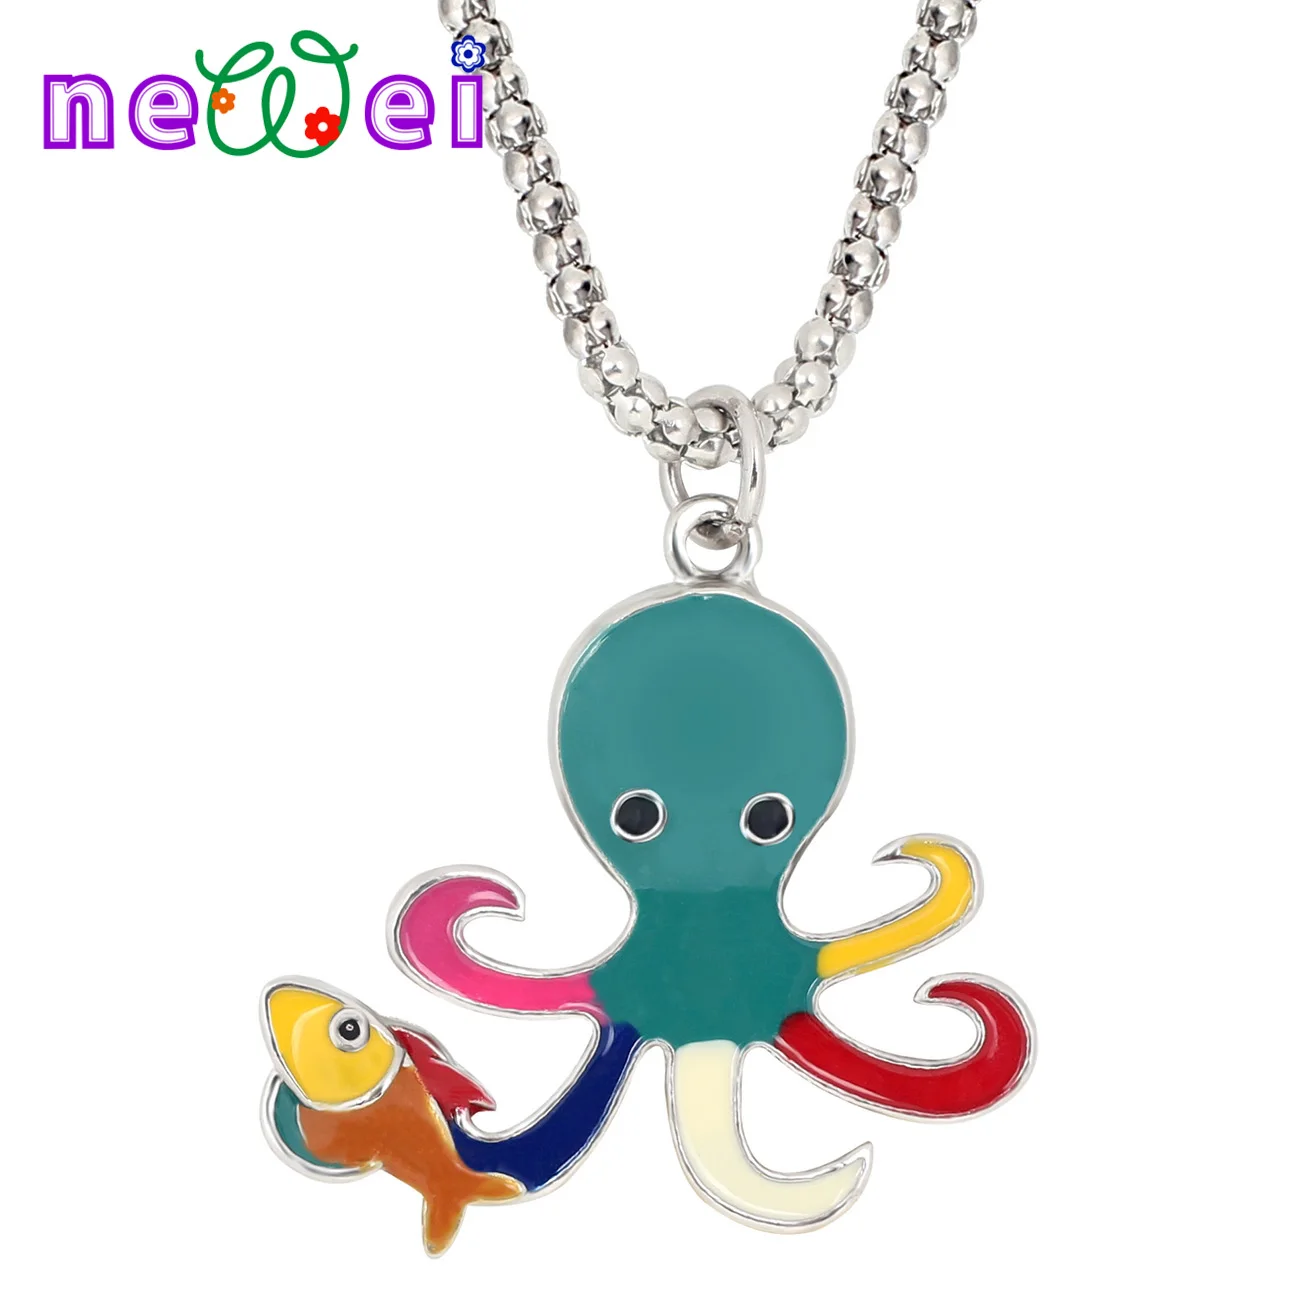 

Enamel Alloy Floral Ocean Fish Octopus Necklace Animals Pendant Chain Fashion Jewelry For Women Girls Teens Kids Charms Gifts, Multicolor